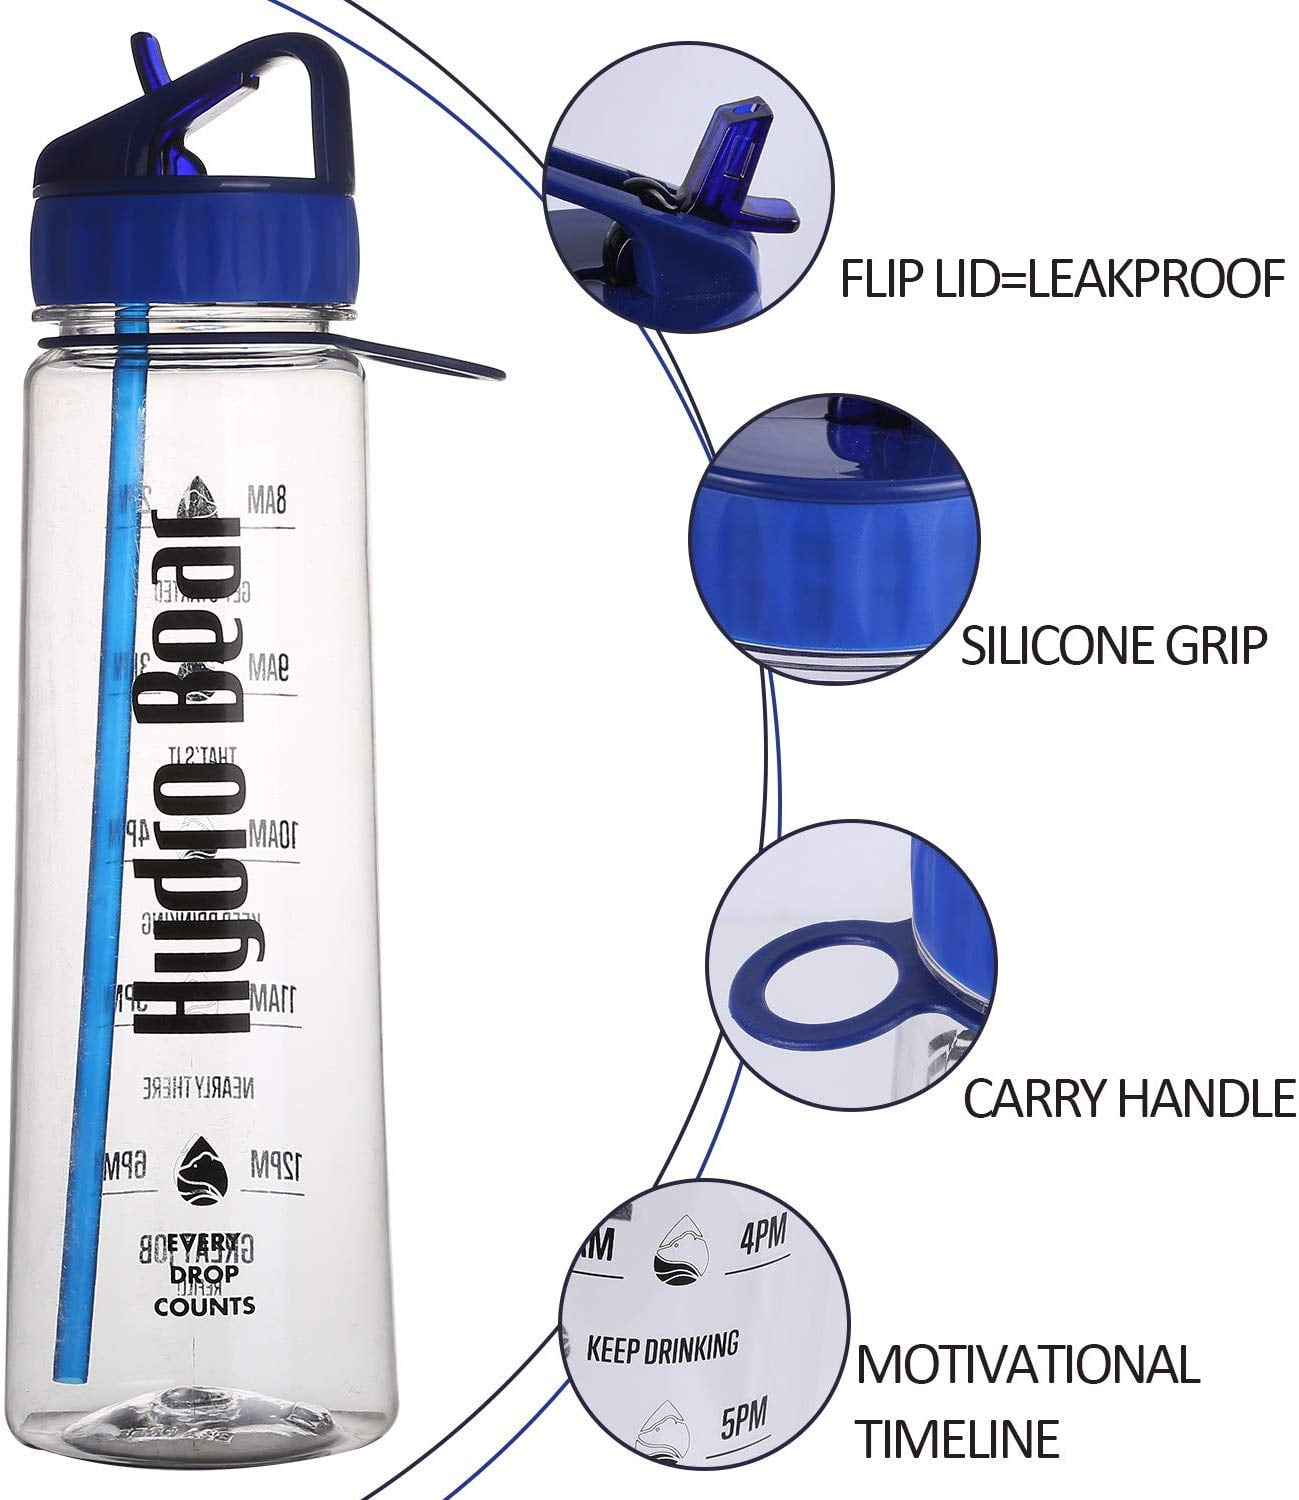 Hike More, Worry Less - Personalized Water Bottle With Time Marker